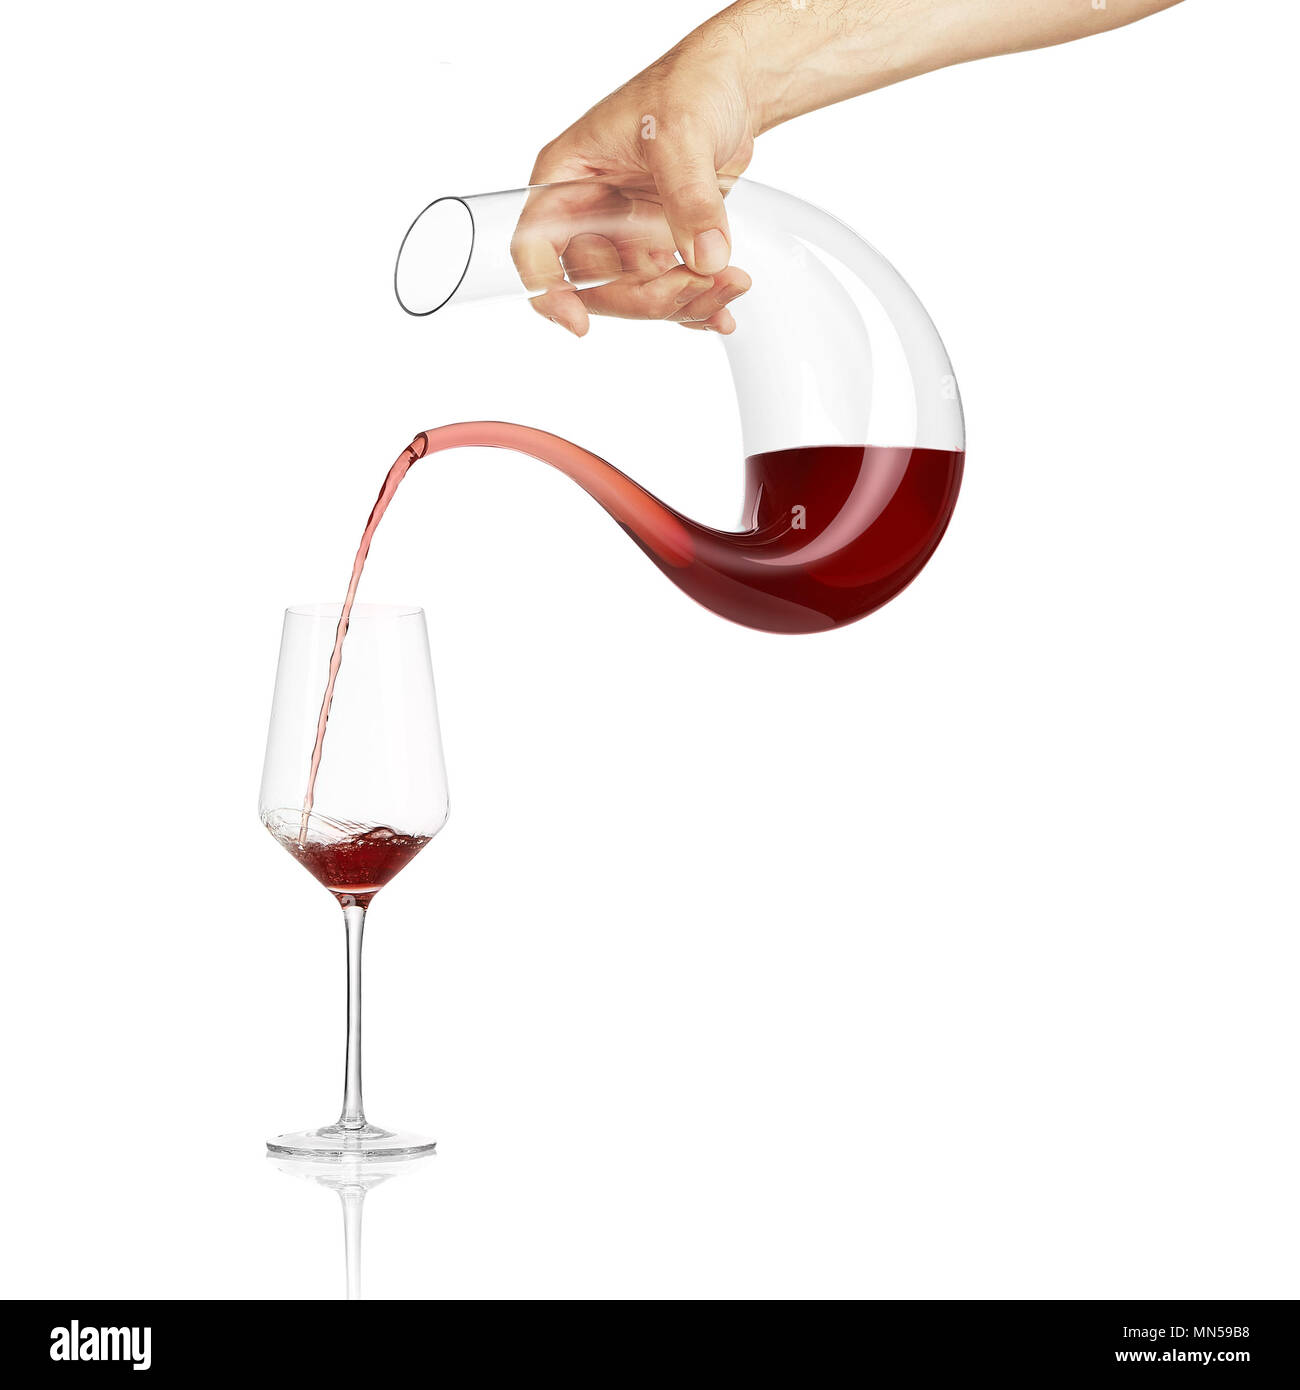 Crystal glass decanter pouring wine Stock Photo